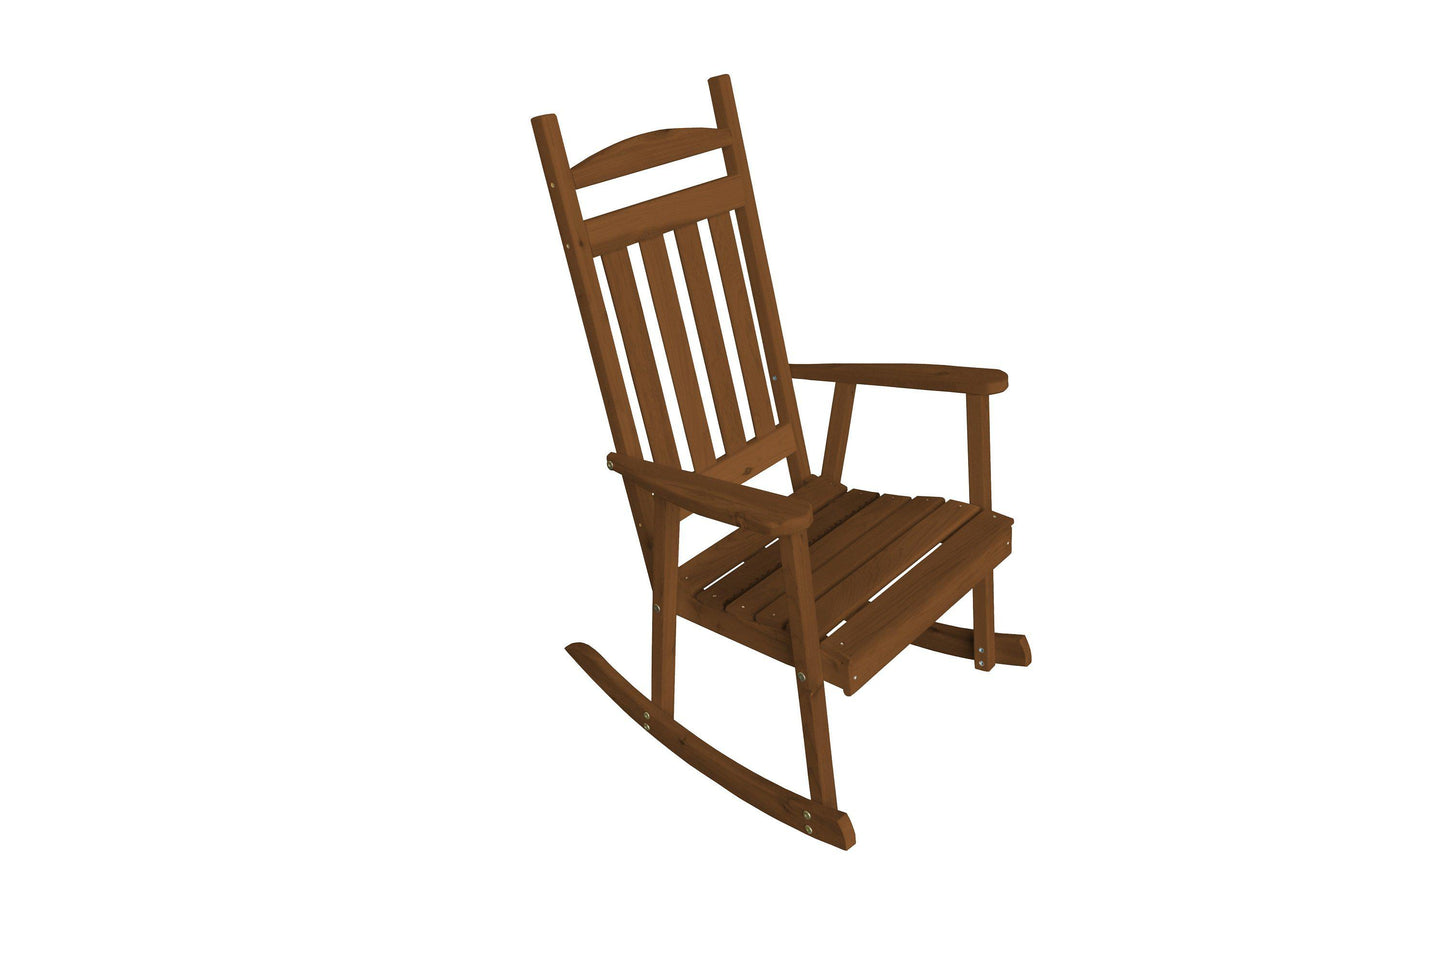 Regallion Outdoor Western Red Cedar Classic Porch Rocking Chair - LEAD TIME TO SHIP 2 WEEKS